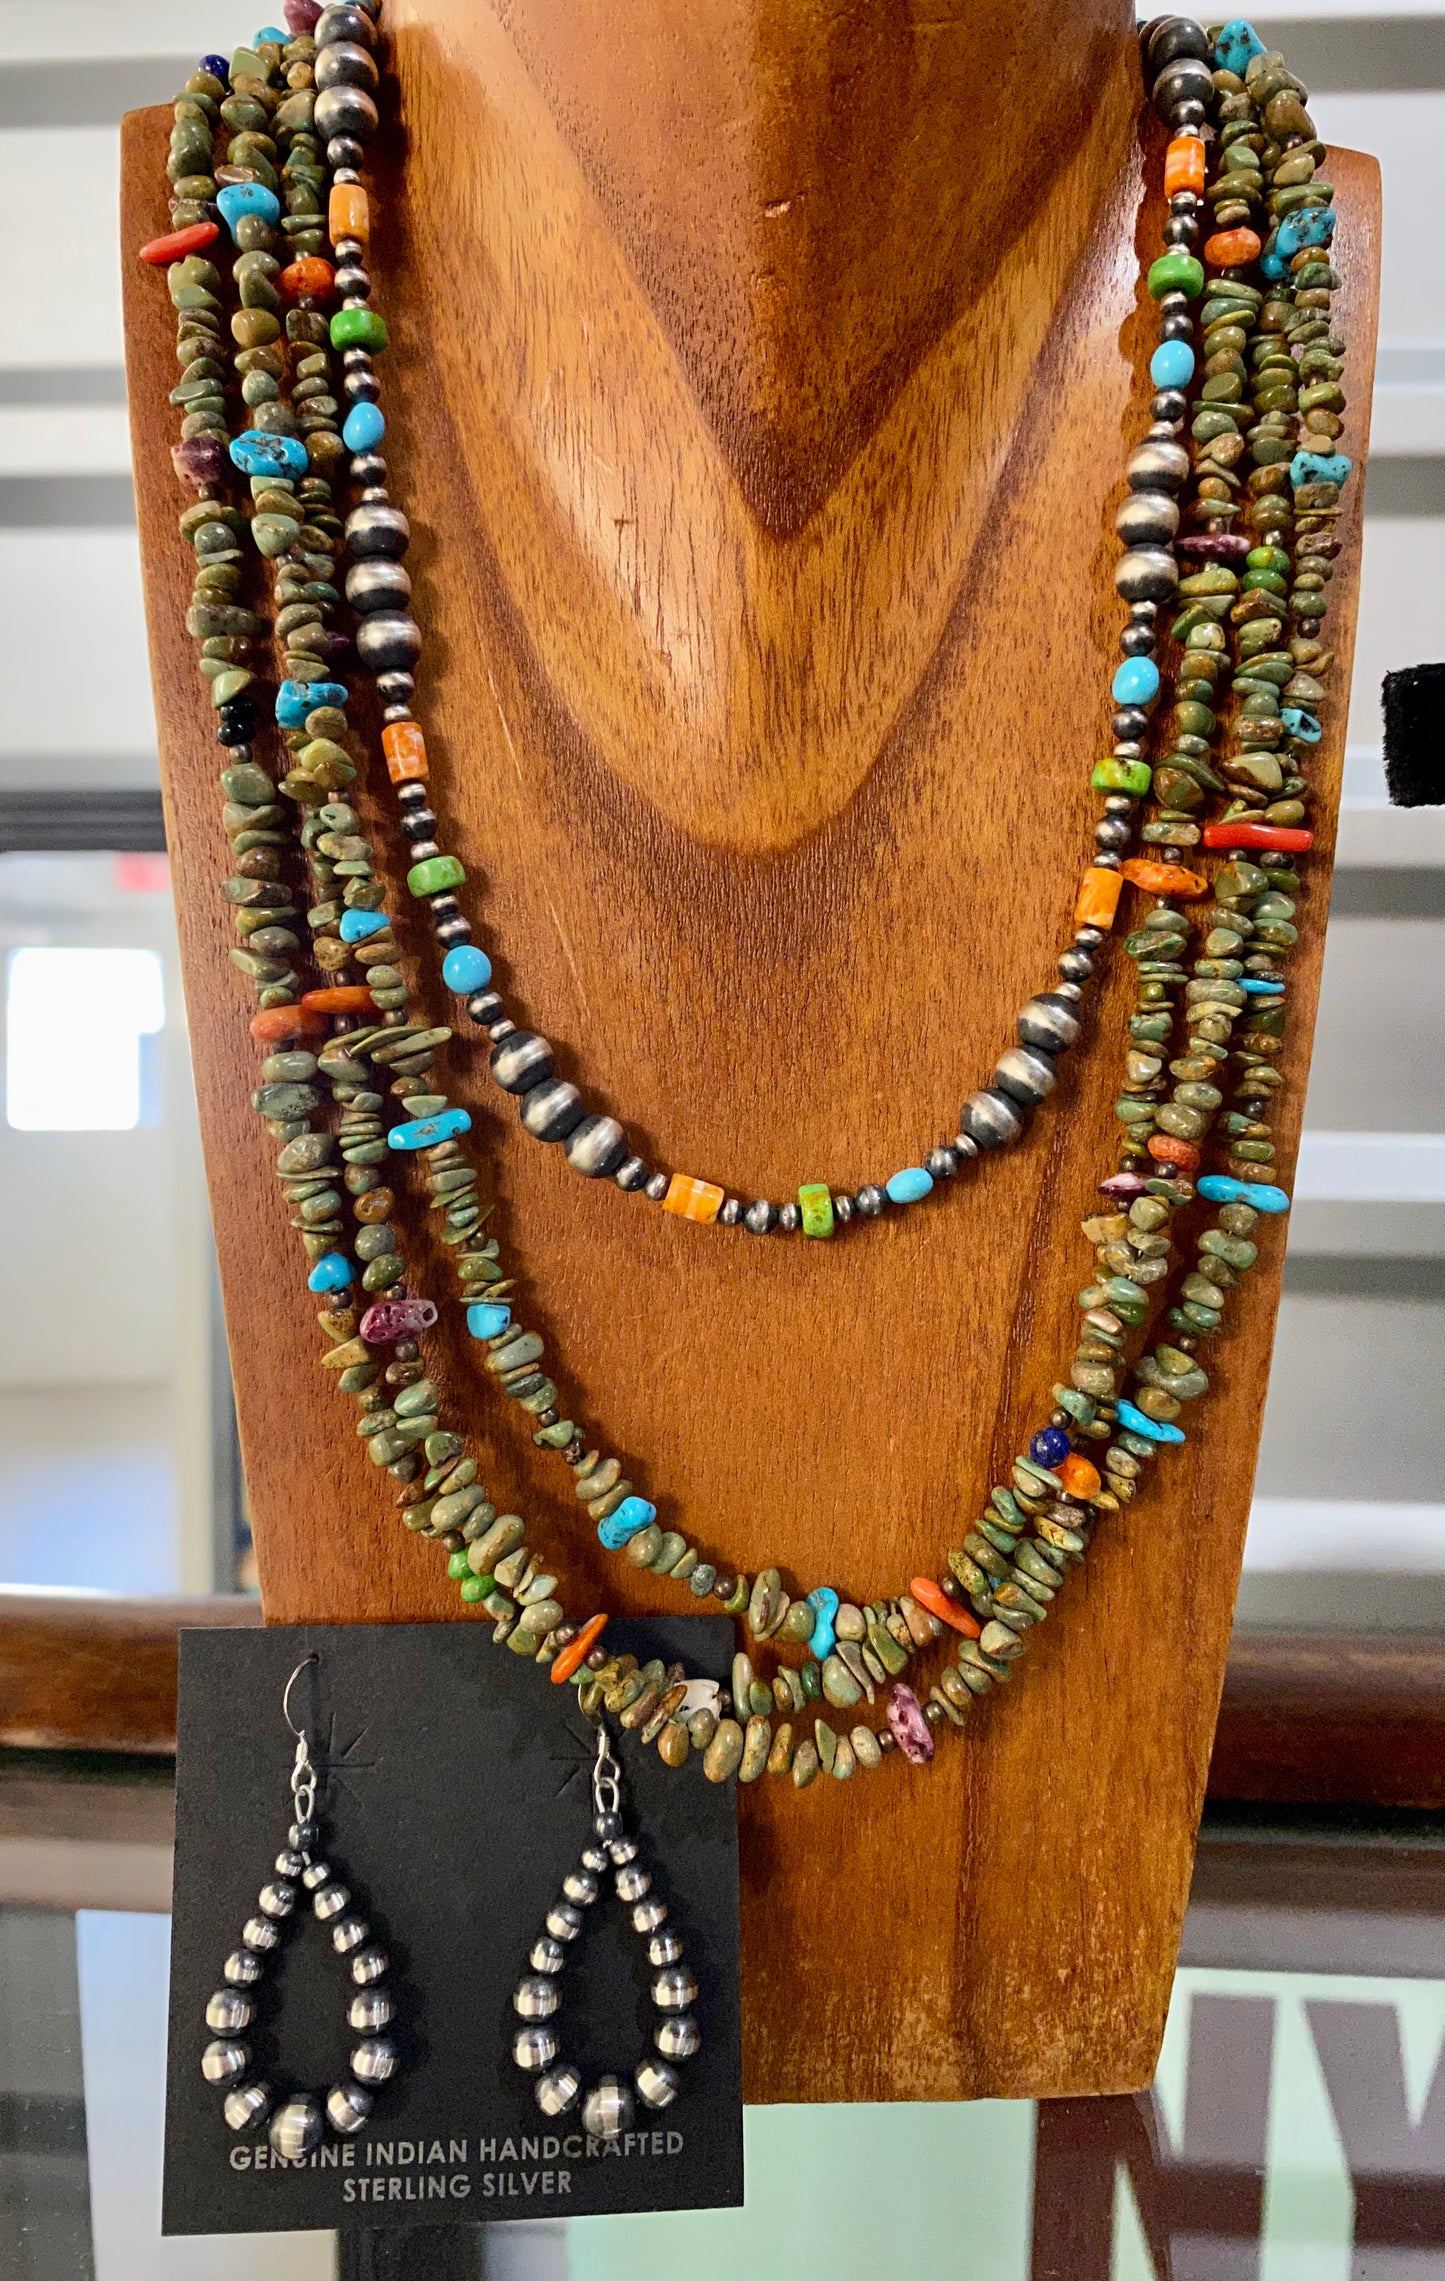 The Bethany 16” Inch Turquoise & Navajo Pearl Necklace